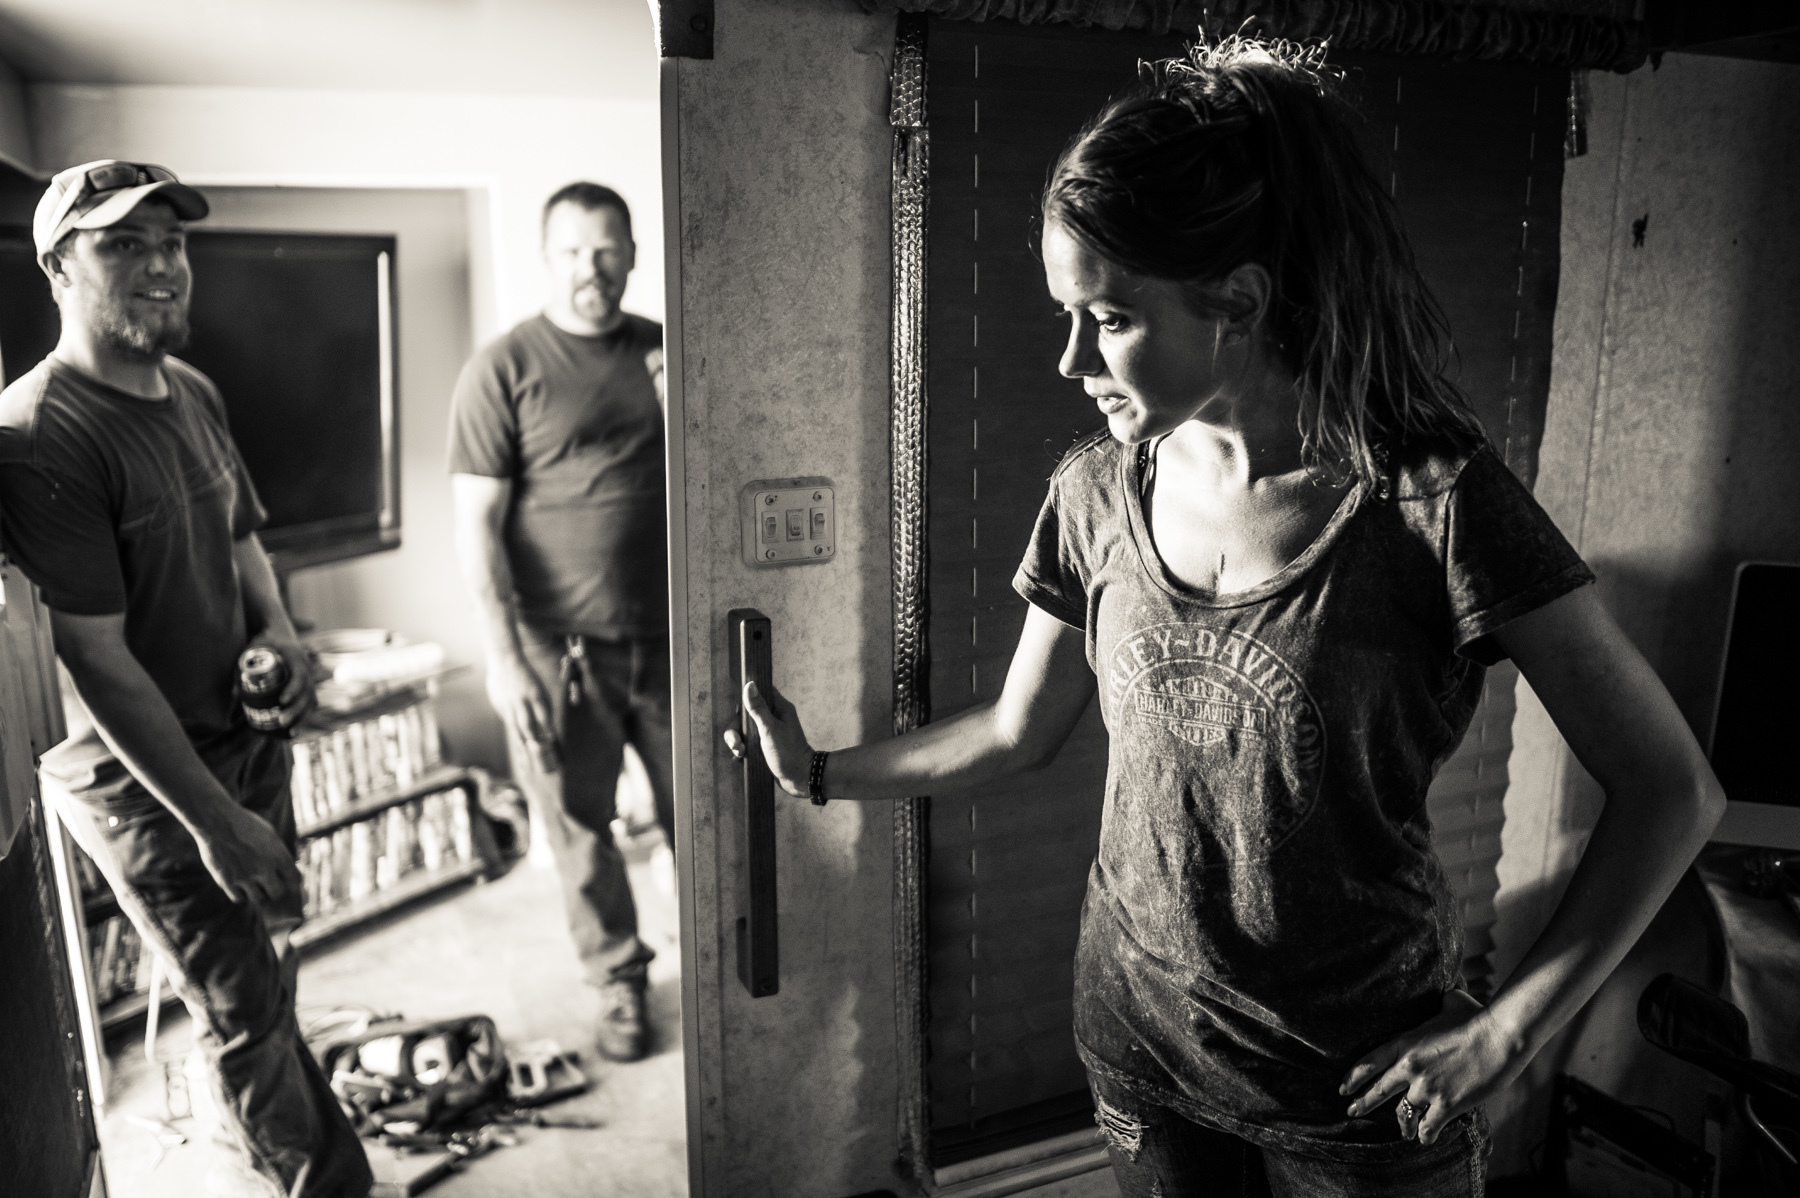  A woman, wife to an oil industry worker, stands in her travel trailer home while her husband and his friend talk and drink beer in the adjacent makeshift den. 